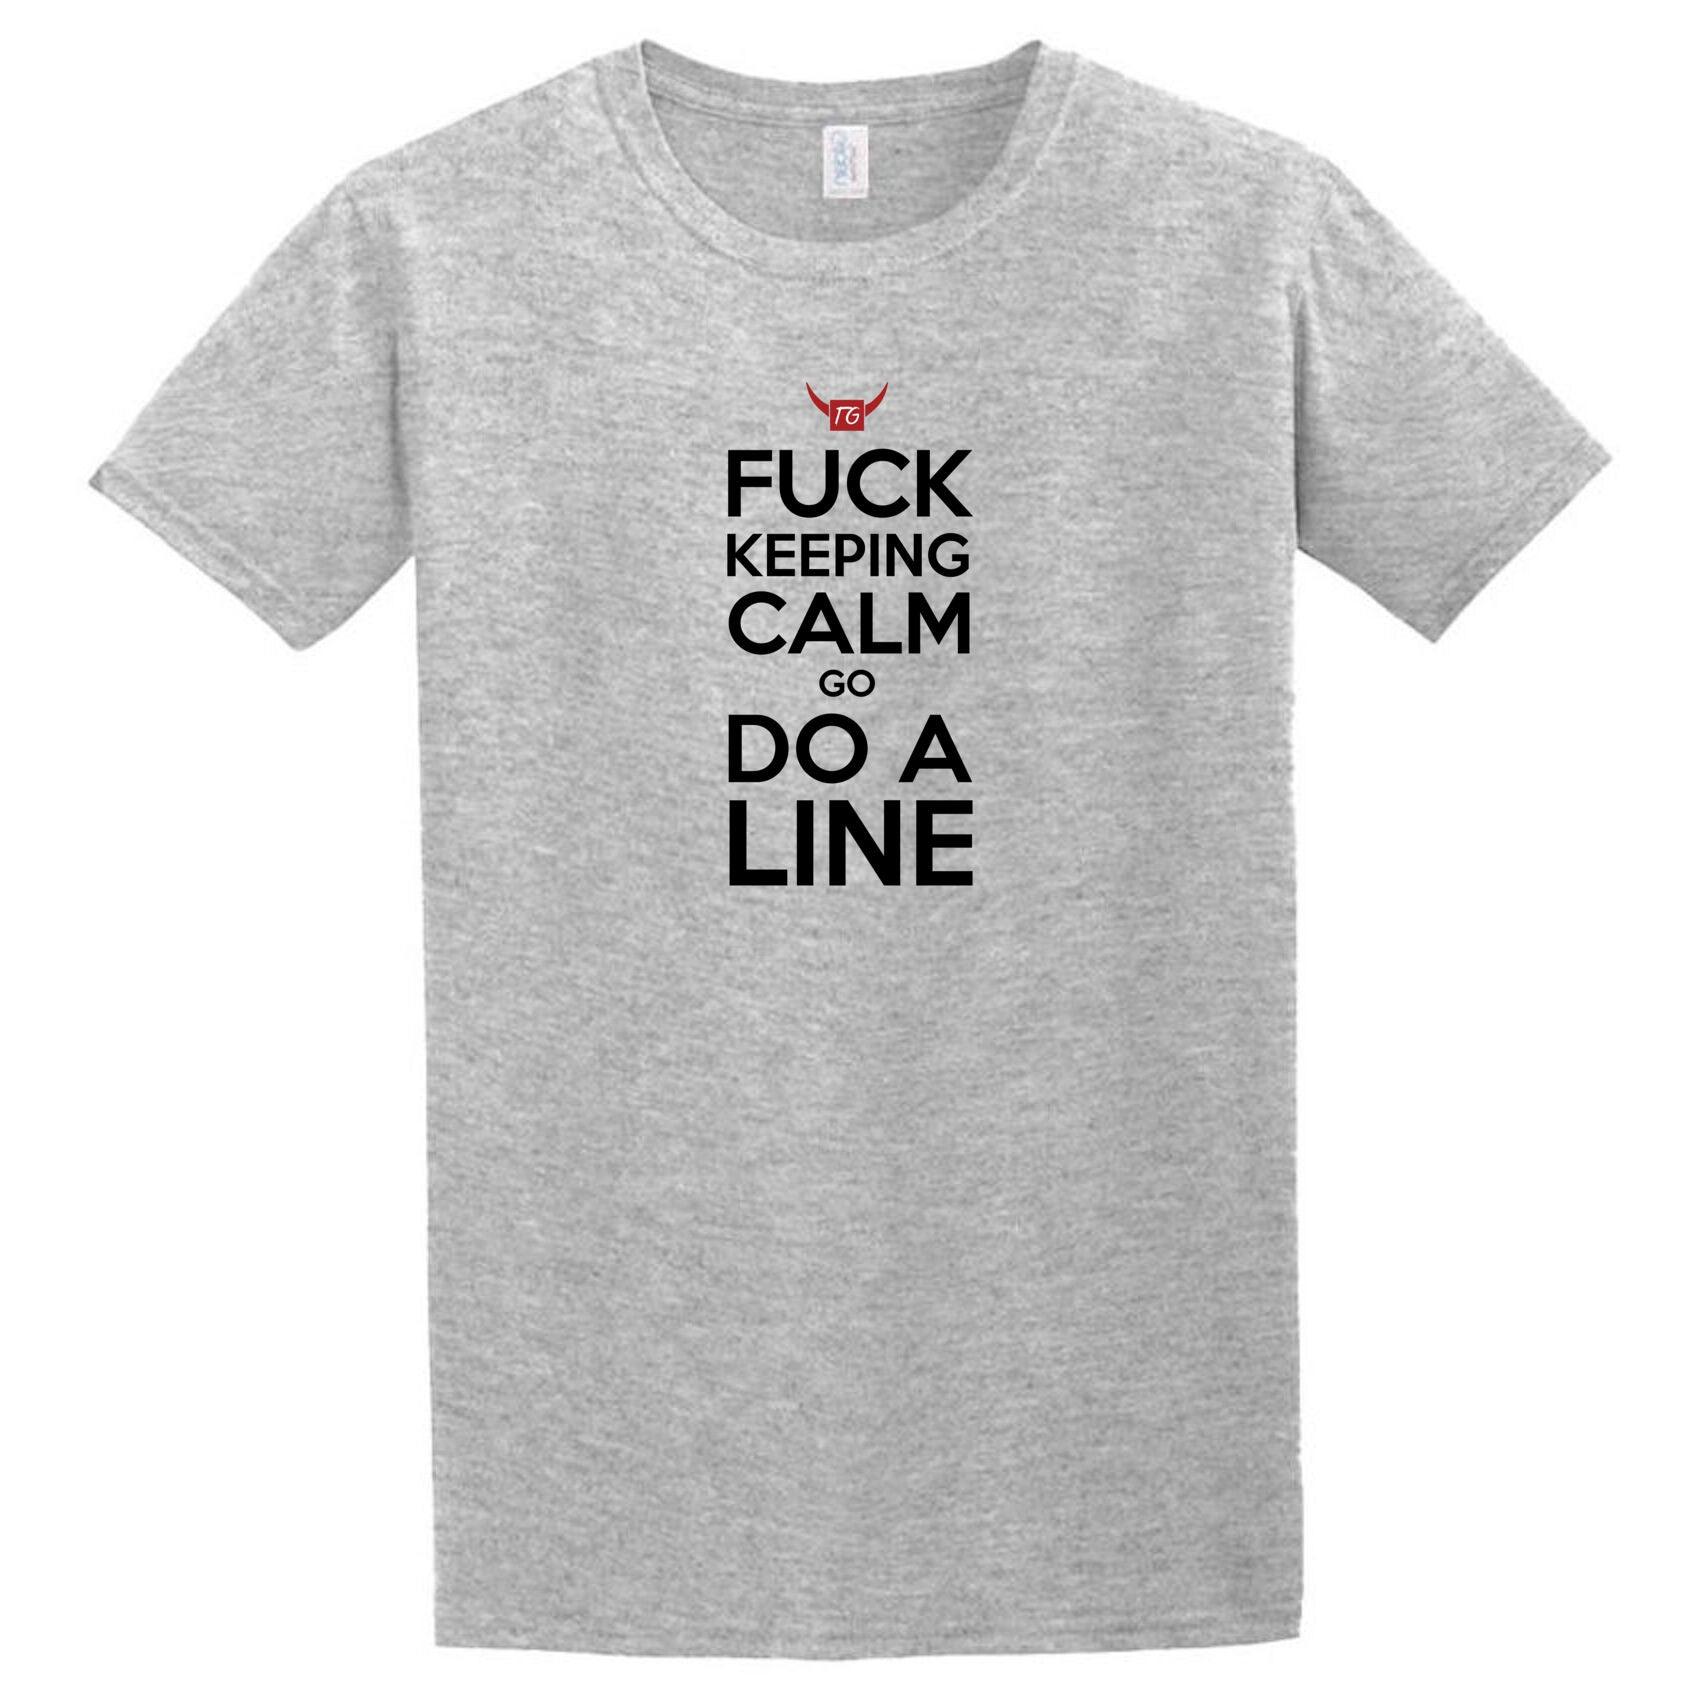 A grey Do A Line T-Shirt by Twisted Gifts that says fuck keep calm and do a line.